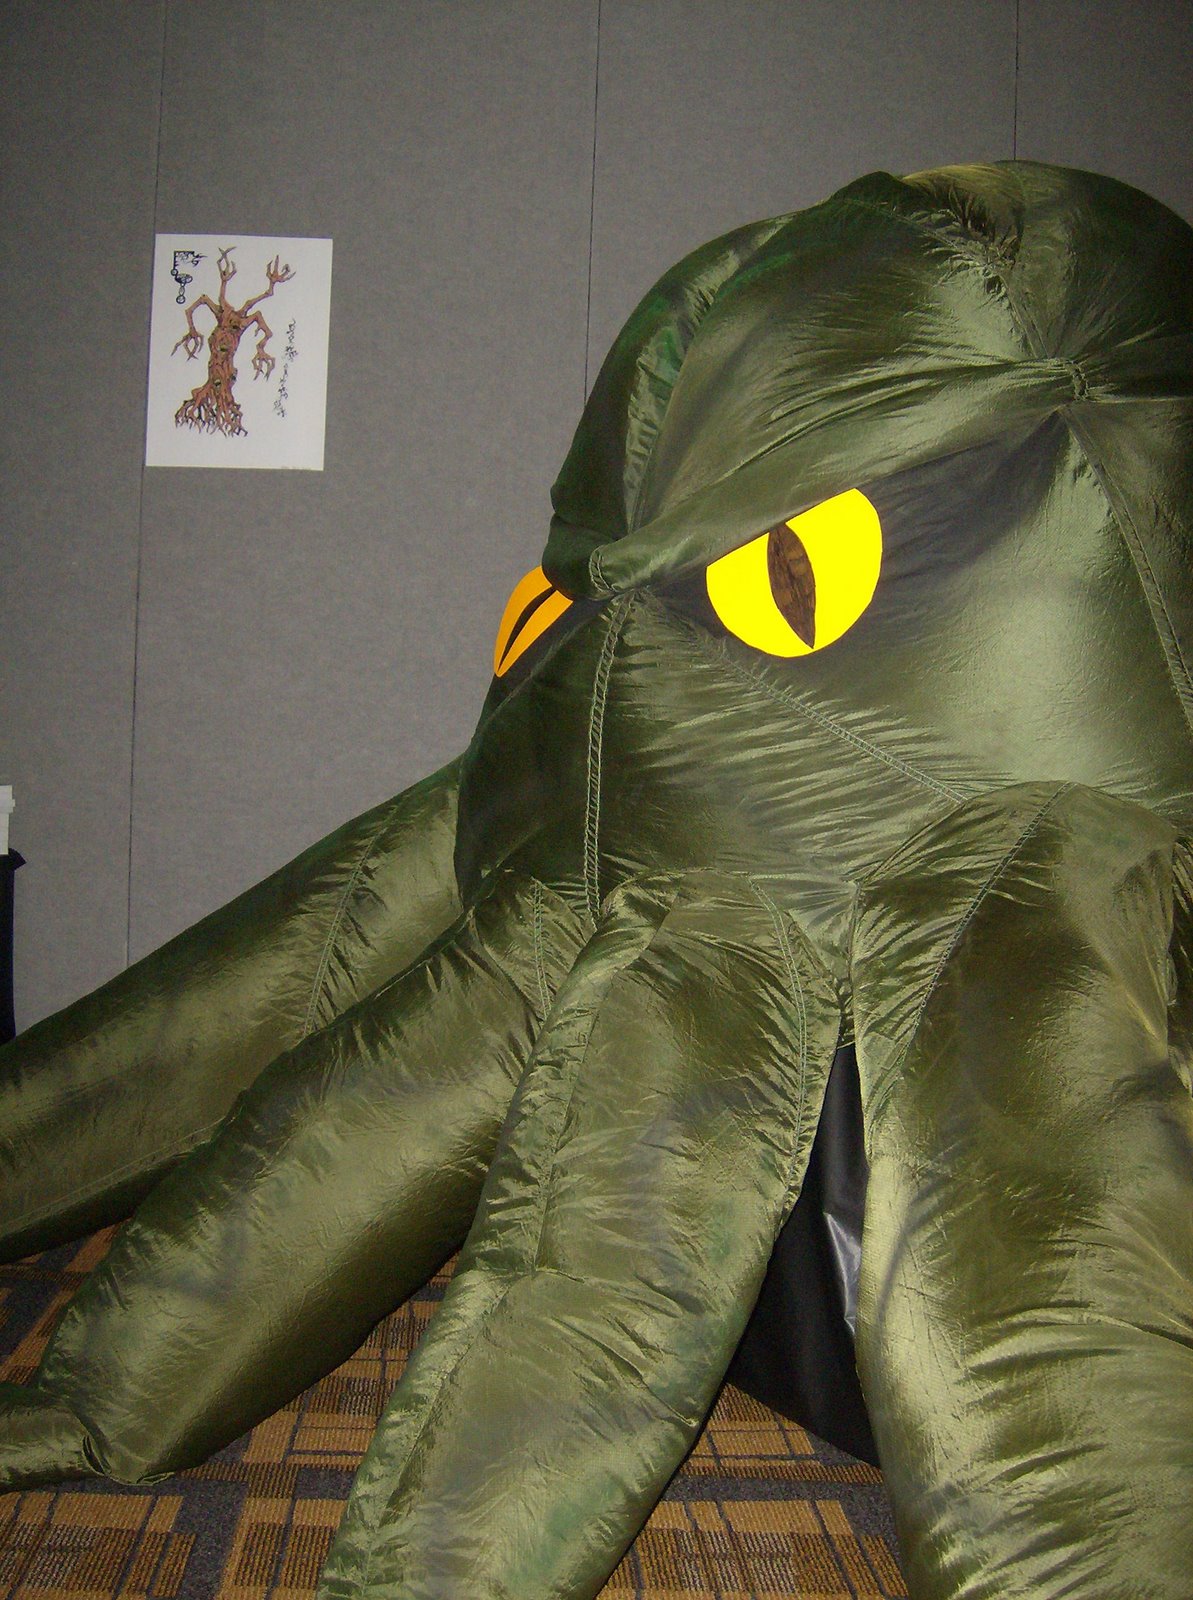 [The+Great+Cthulhu+rises+from+the+RC+room+floor!.JPG]